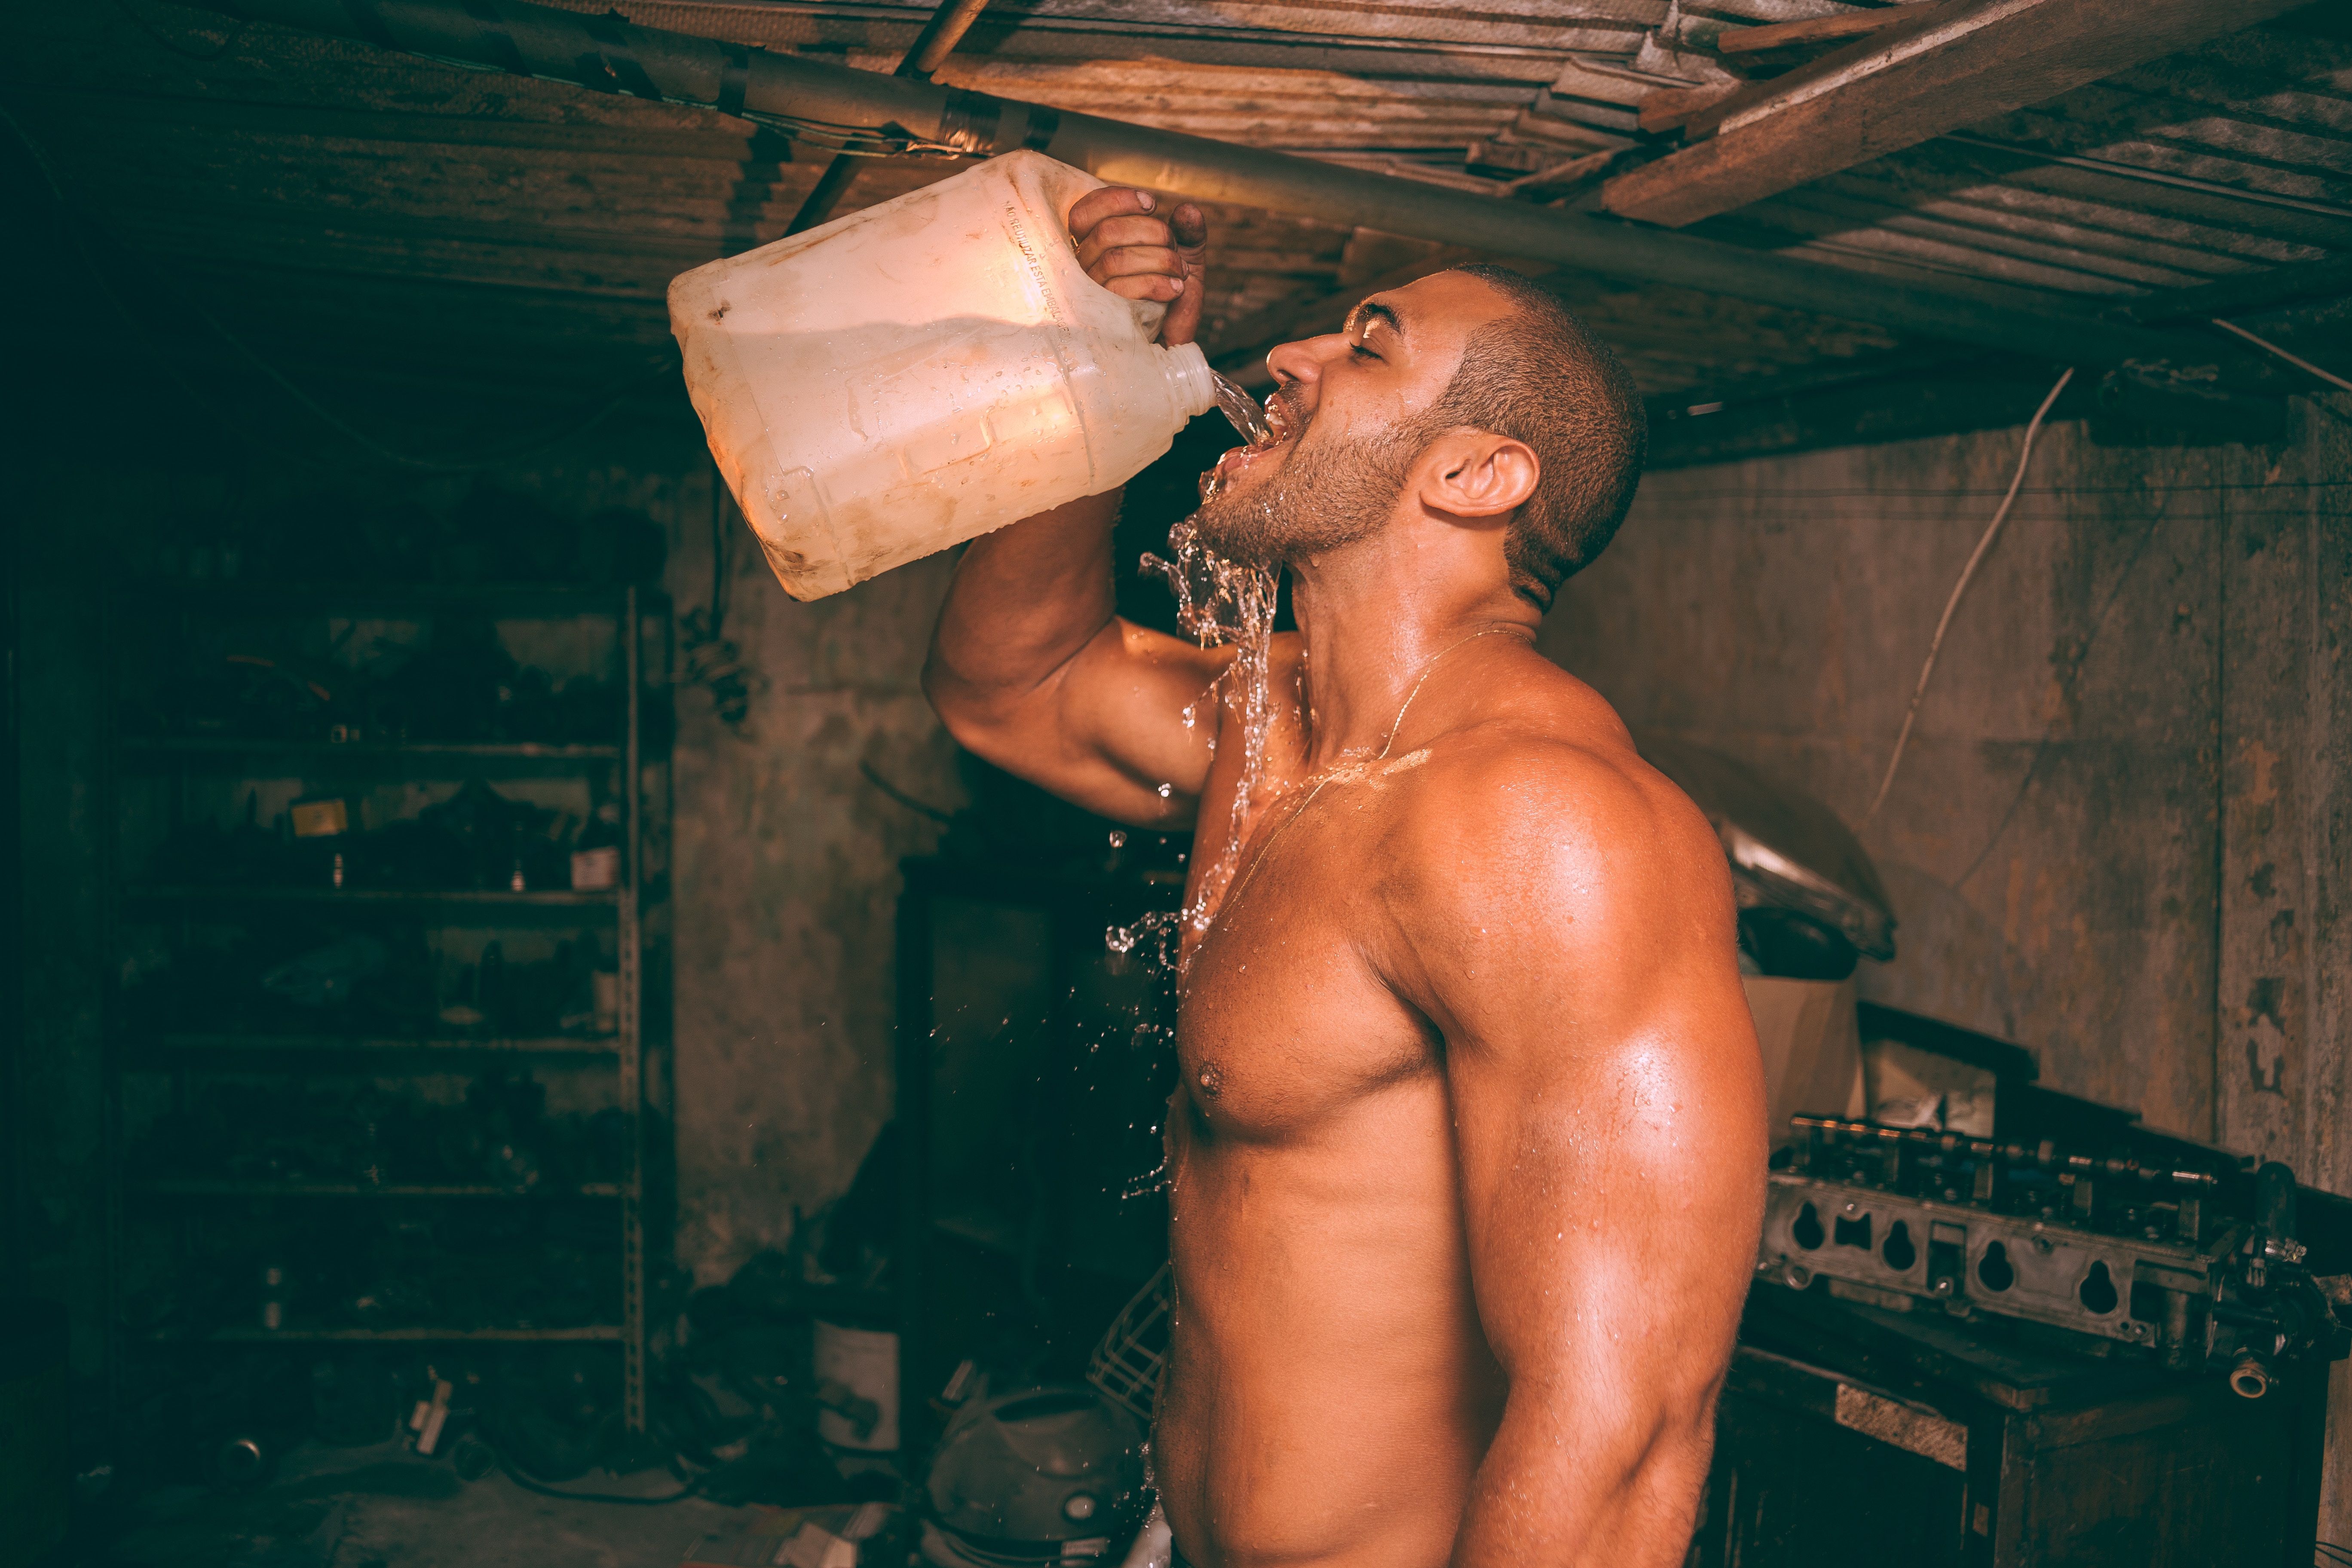 5472x3648 #person, #fitness, #Creative Commons image, #muscular, # strong, #man, #shirtless, #drinking, #sports, #exercise, #work out, #torso, #human, #athlete, #buff, #working out, #people, #sport, #water, #male, #caucasian. Mocah HD Wallpaper